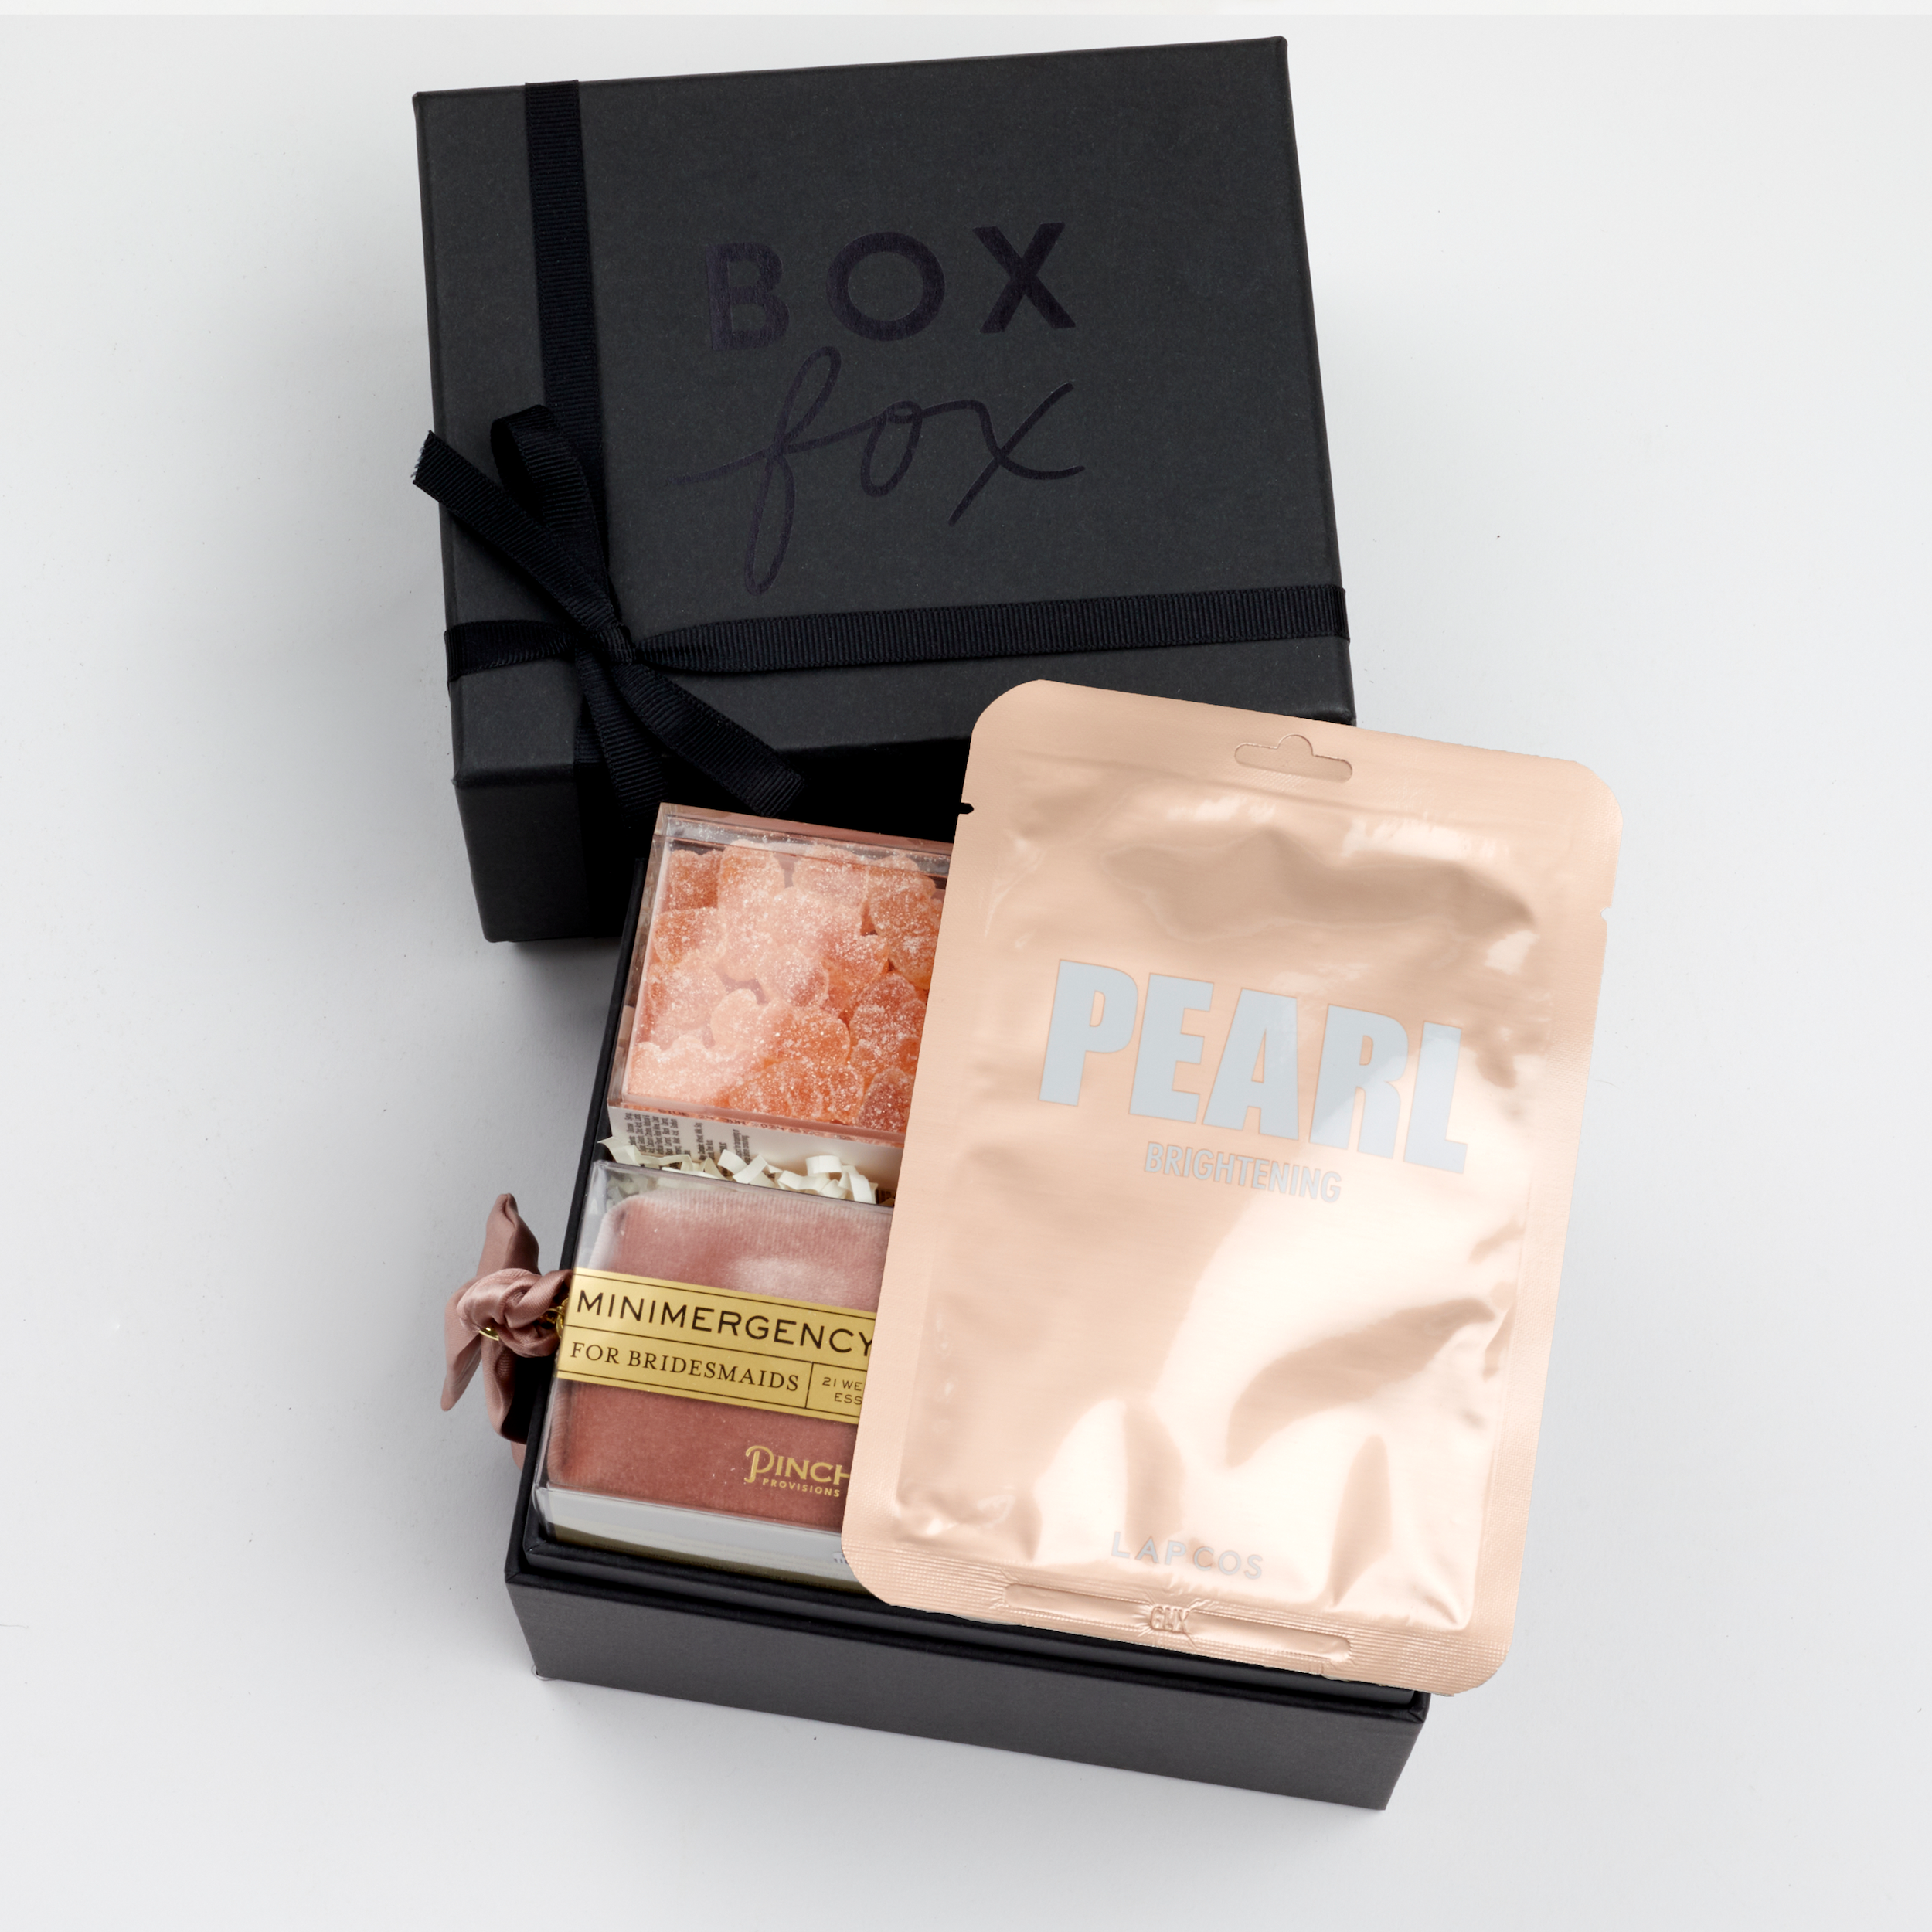 BOXFOX Bridesmaid Gift Box in Matte Black with Lapcos Pearl Brightening Mask, Sugarfina sparkling pink gummies, Pinch Provisions pinch velvet bridesmaids essential kit